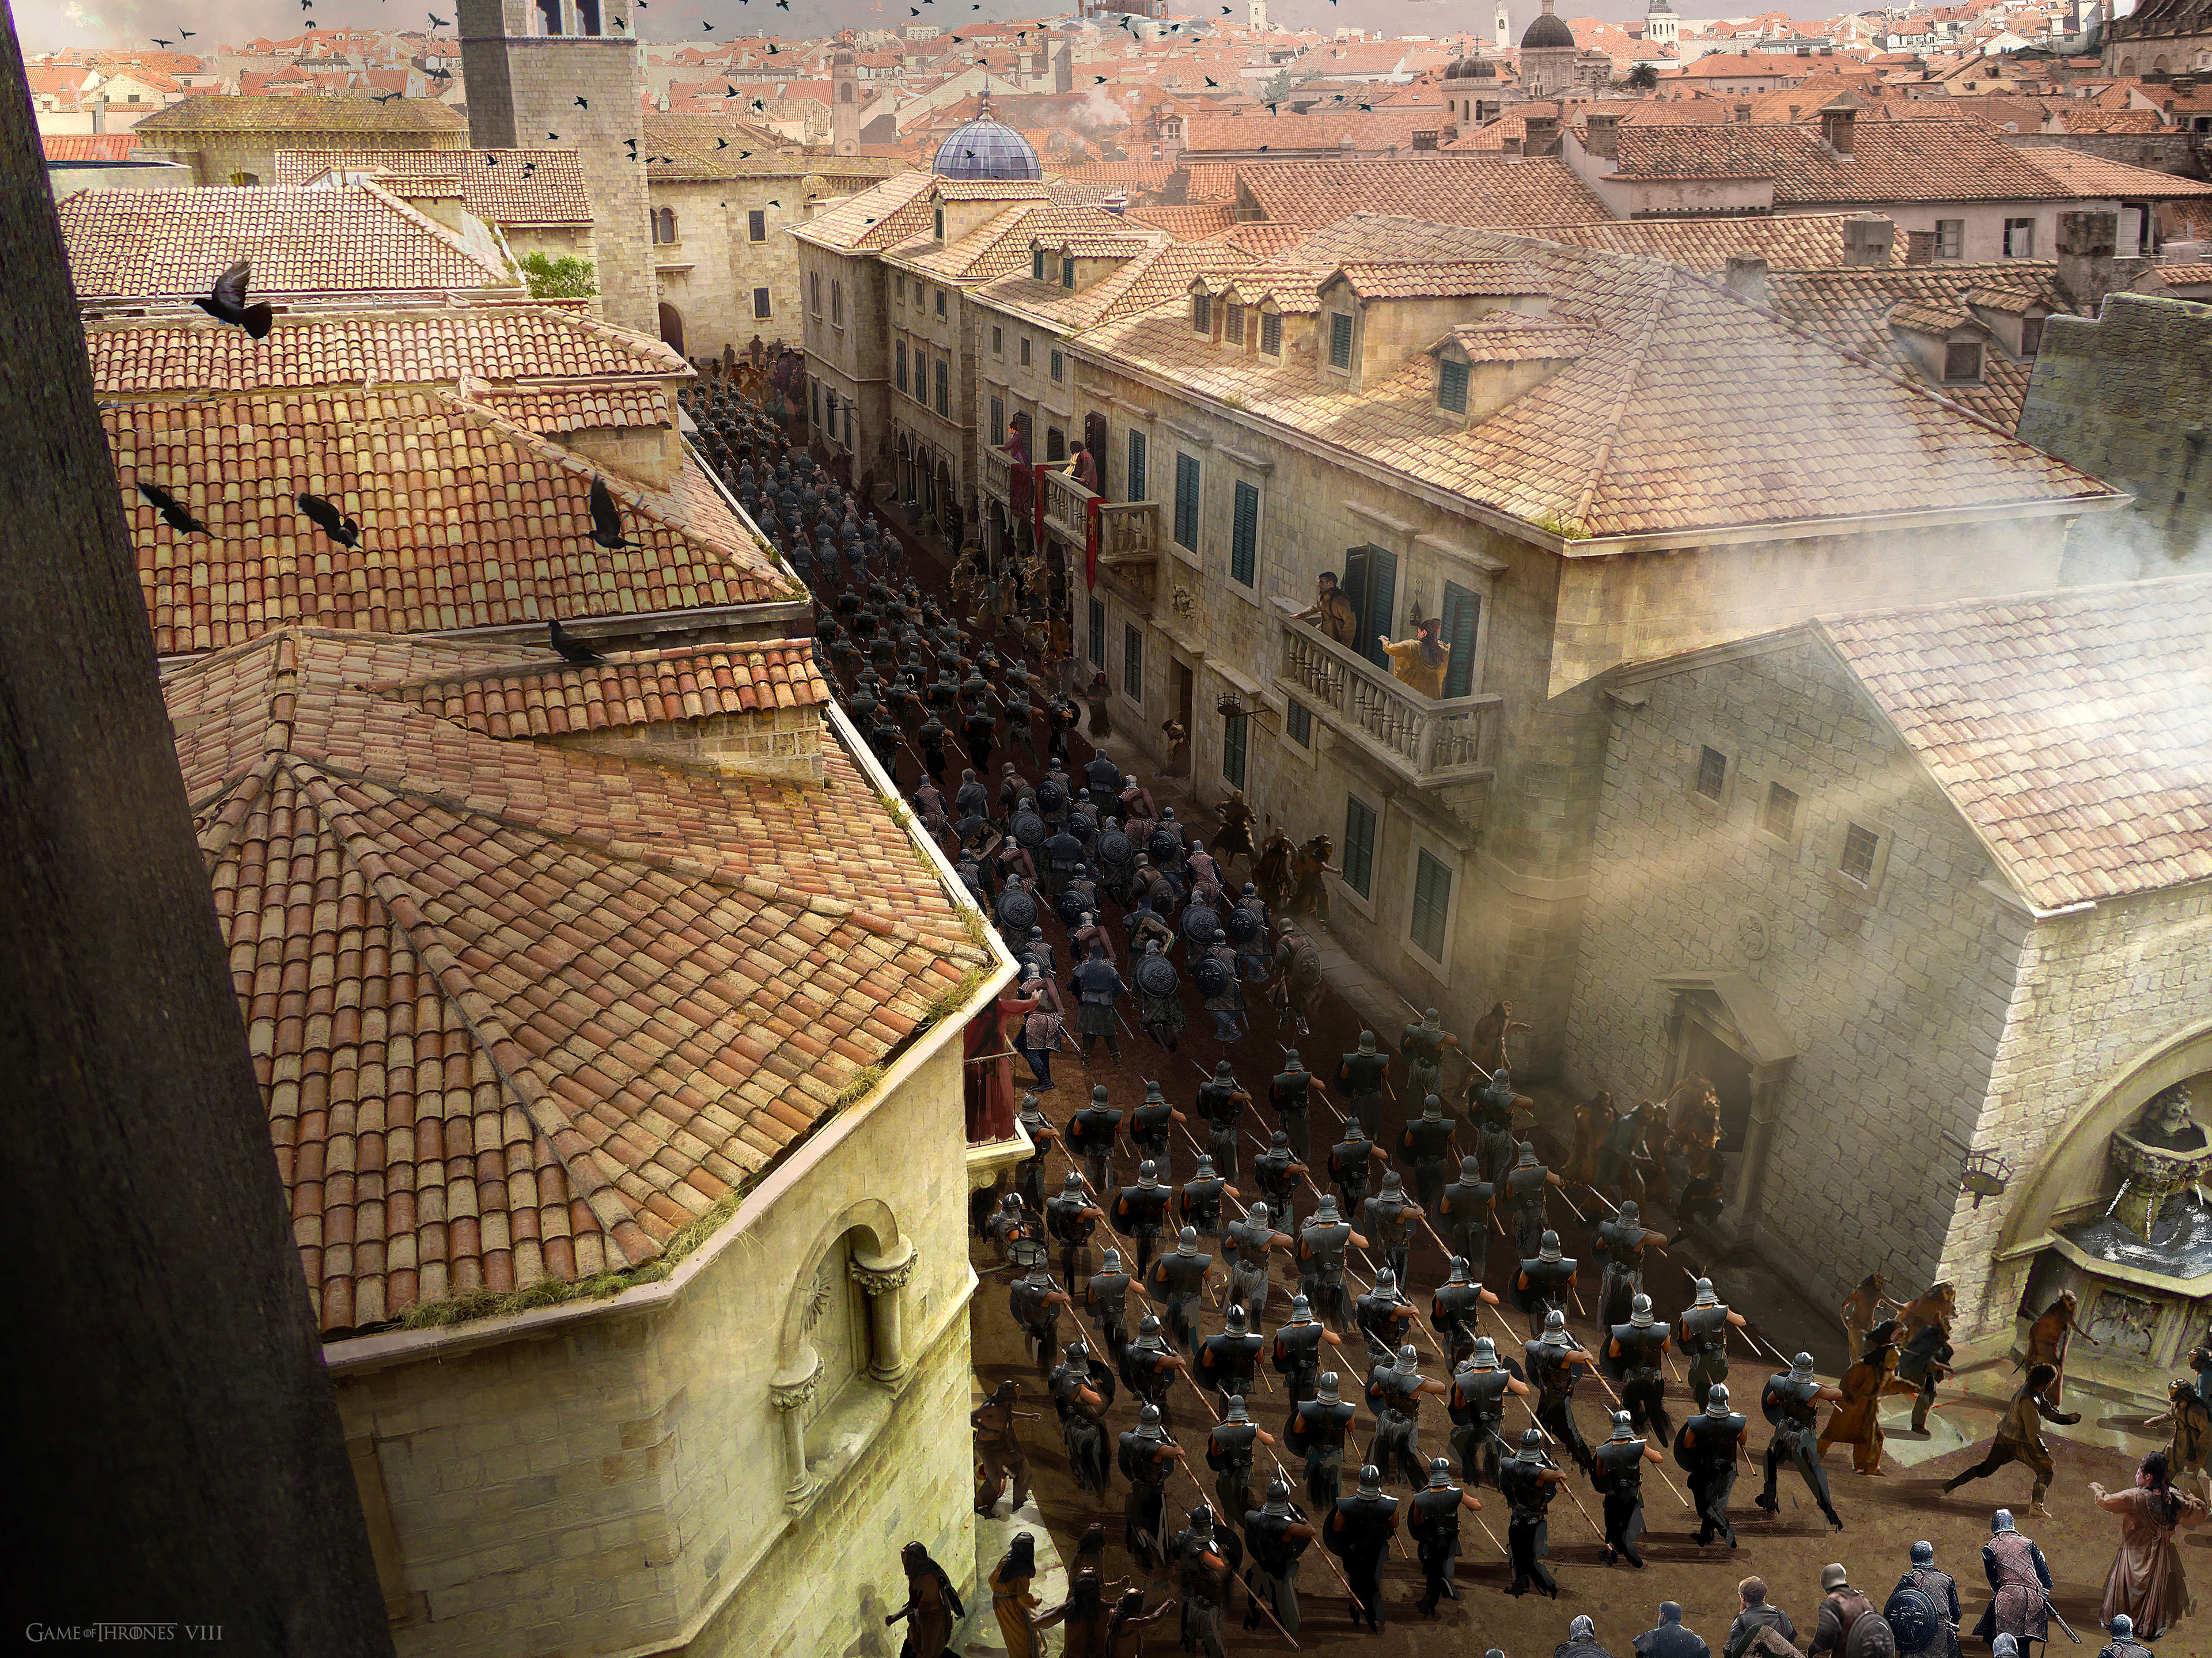 Concept to show Unsullied and Northern troops entering Kings Landing